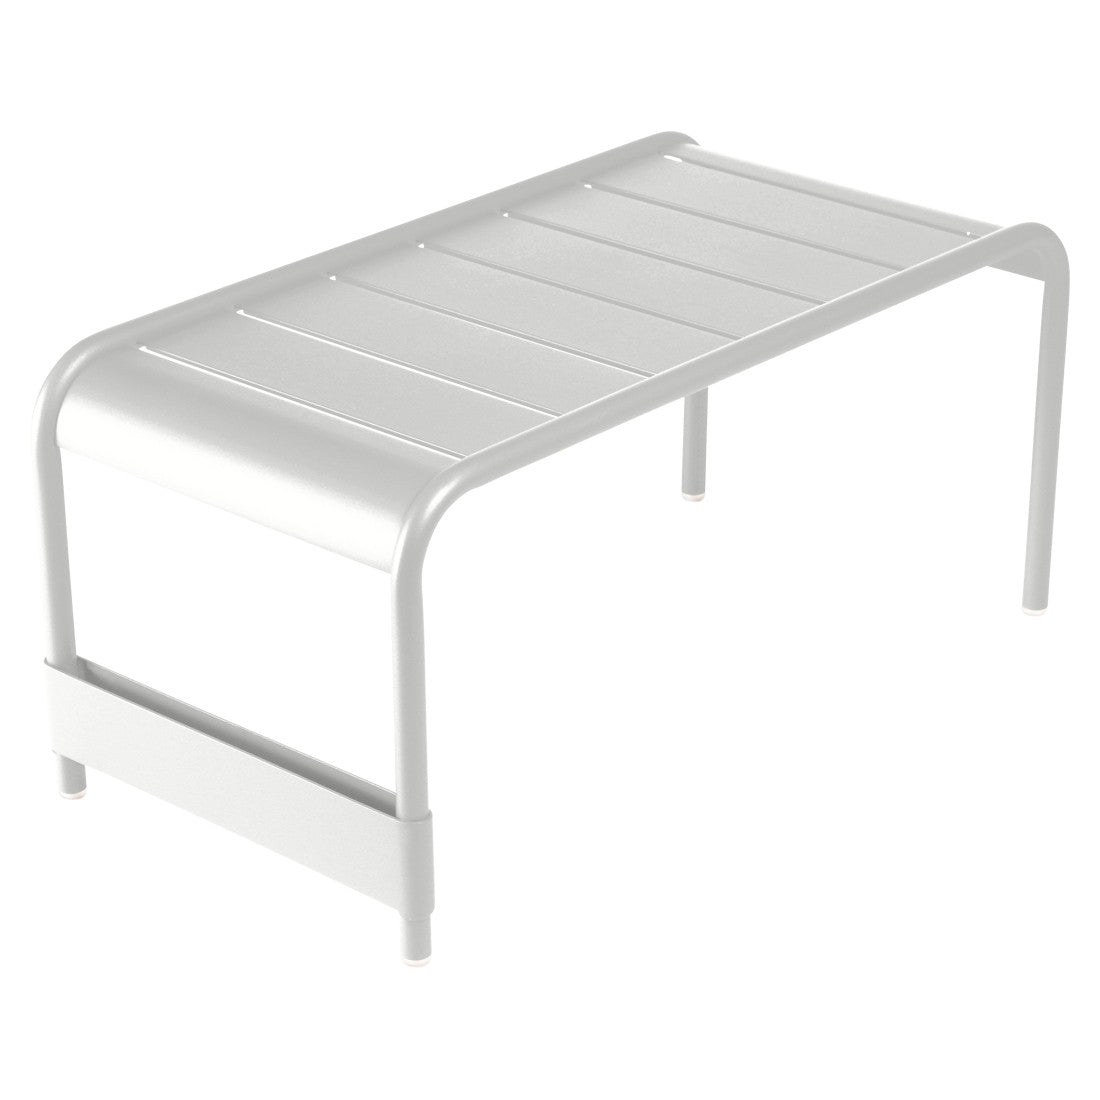 Fermob Luxembourg Large Low Table/Garden Bench - bonmarche